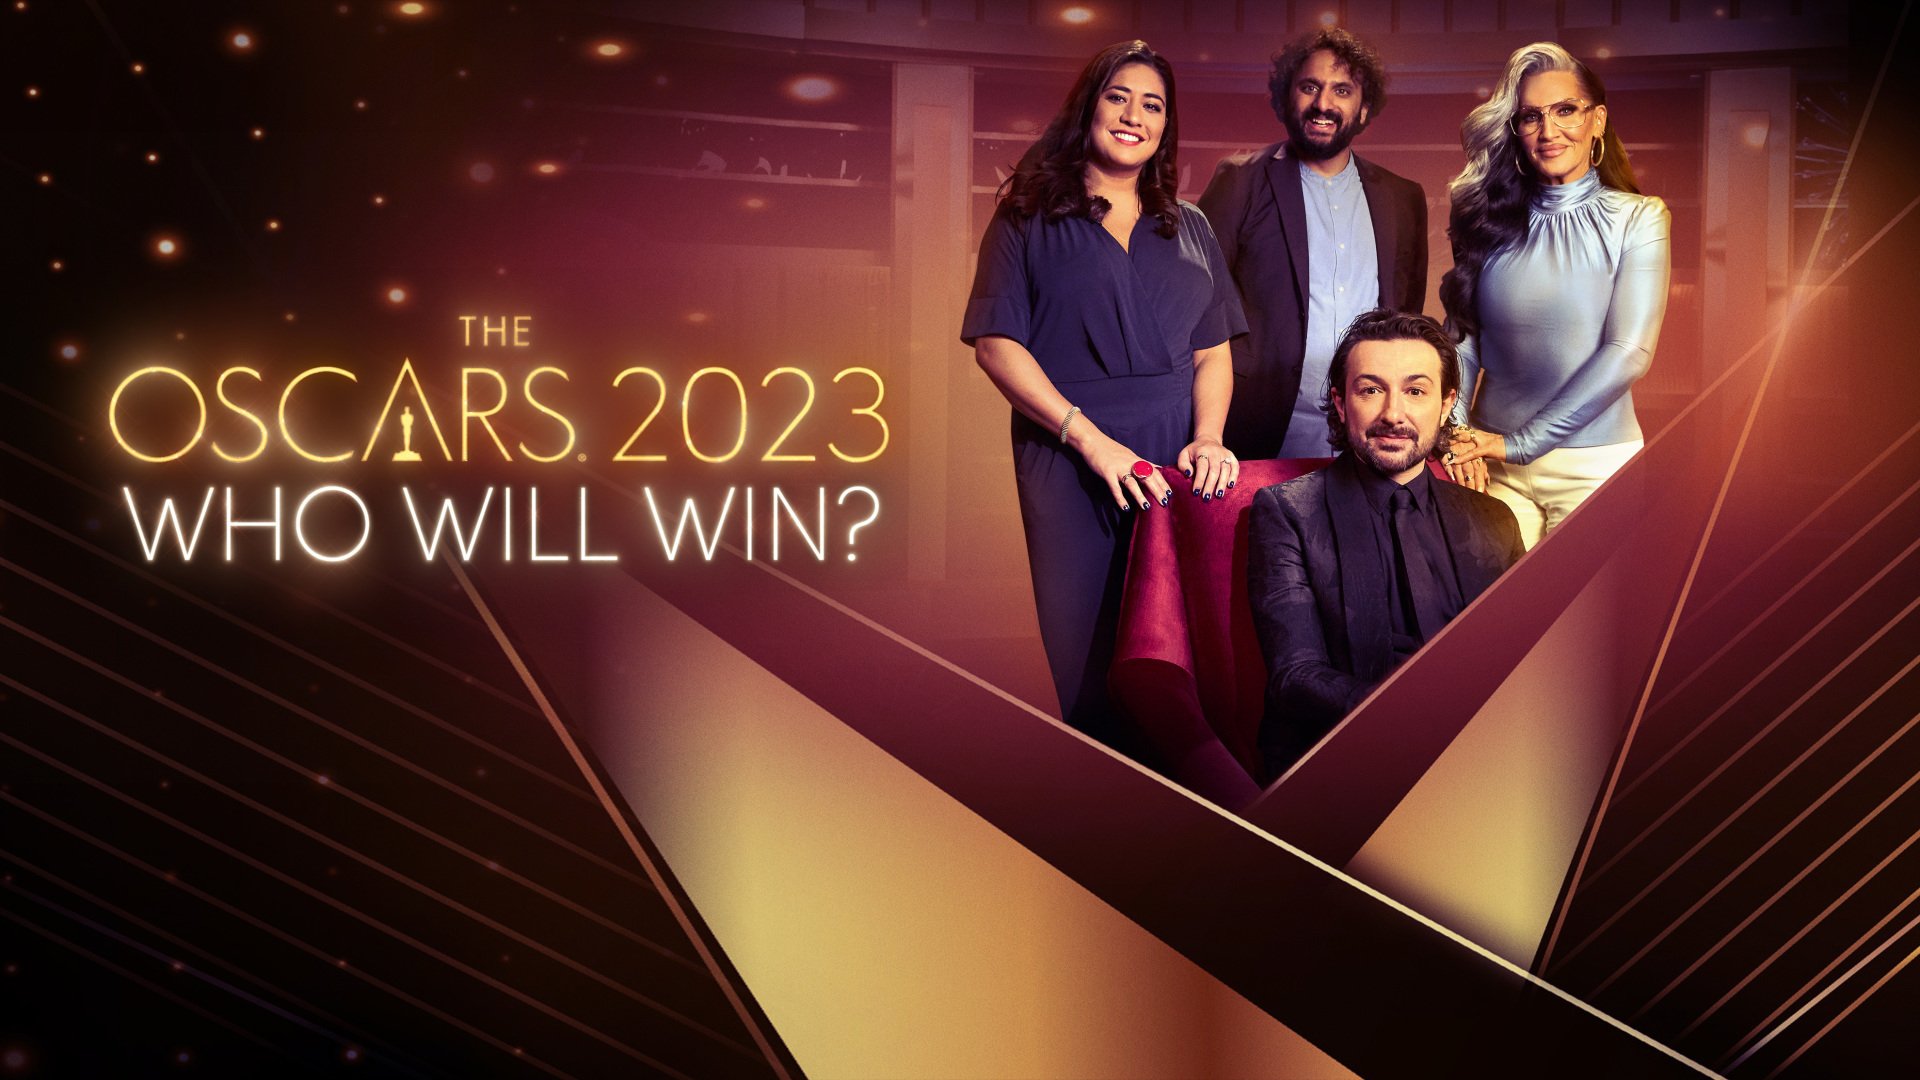 Watch The Oscars 2023 Who Will Win? Online Stream Full Episodes